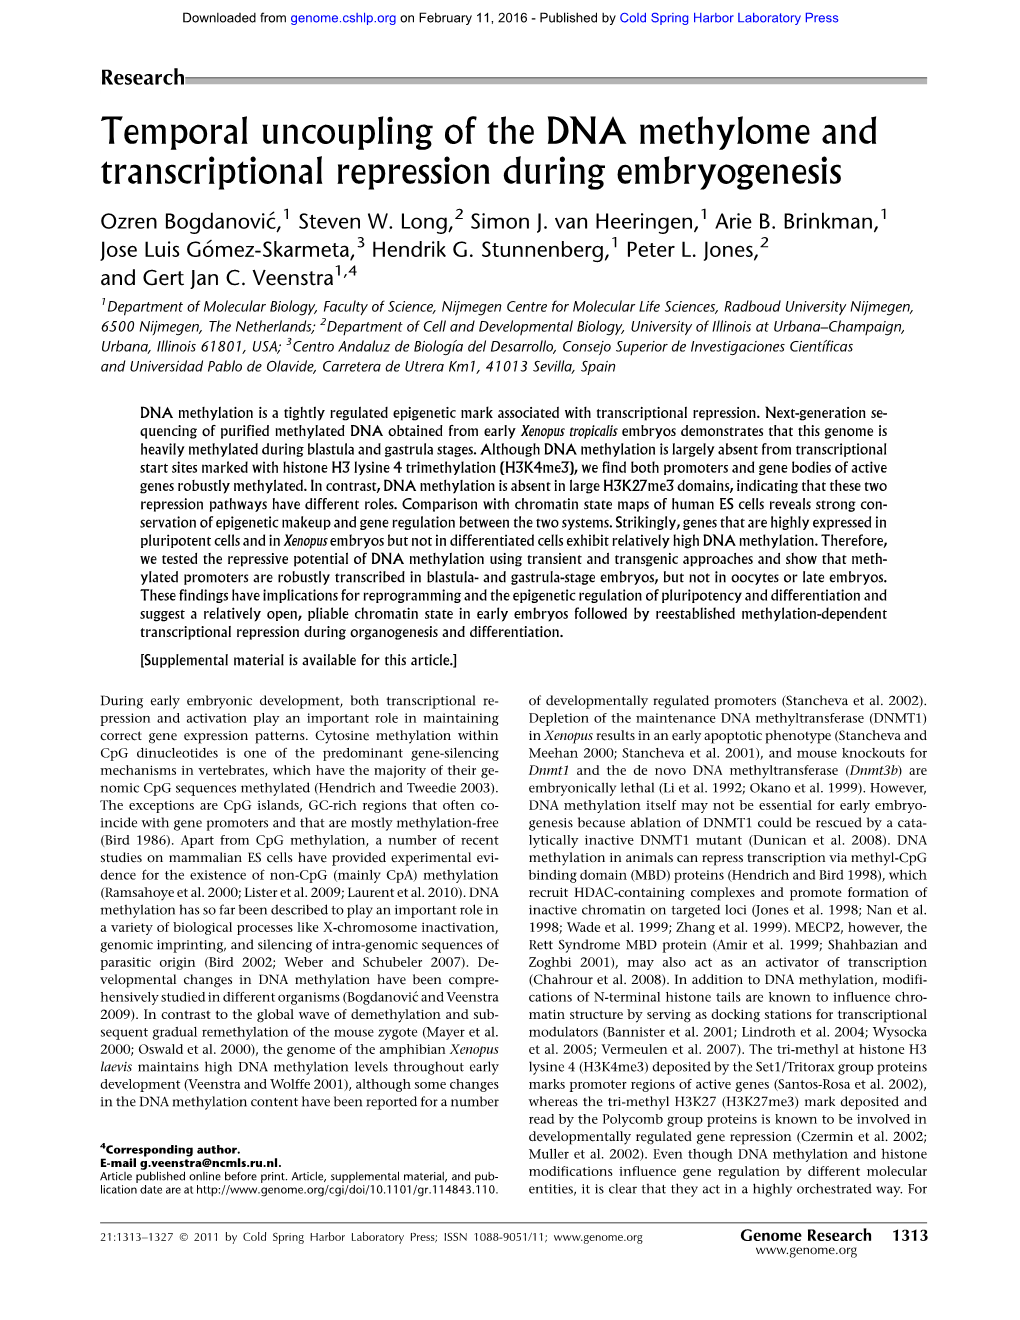 Temporal Uncoupling of the DNA Methylome and Transcriptional Repression During Embryogenesis